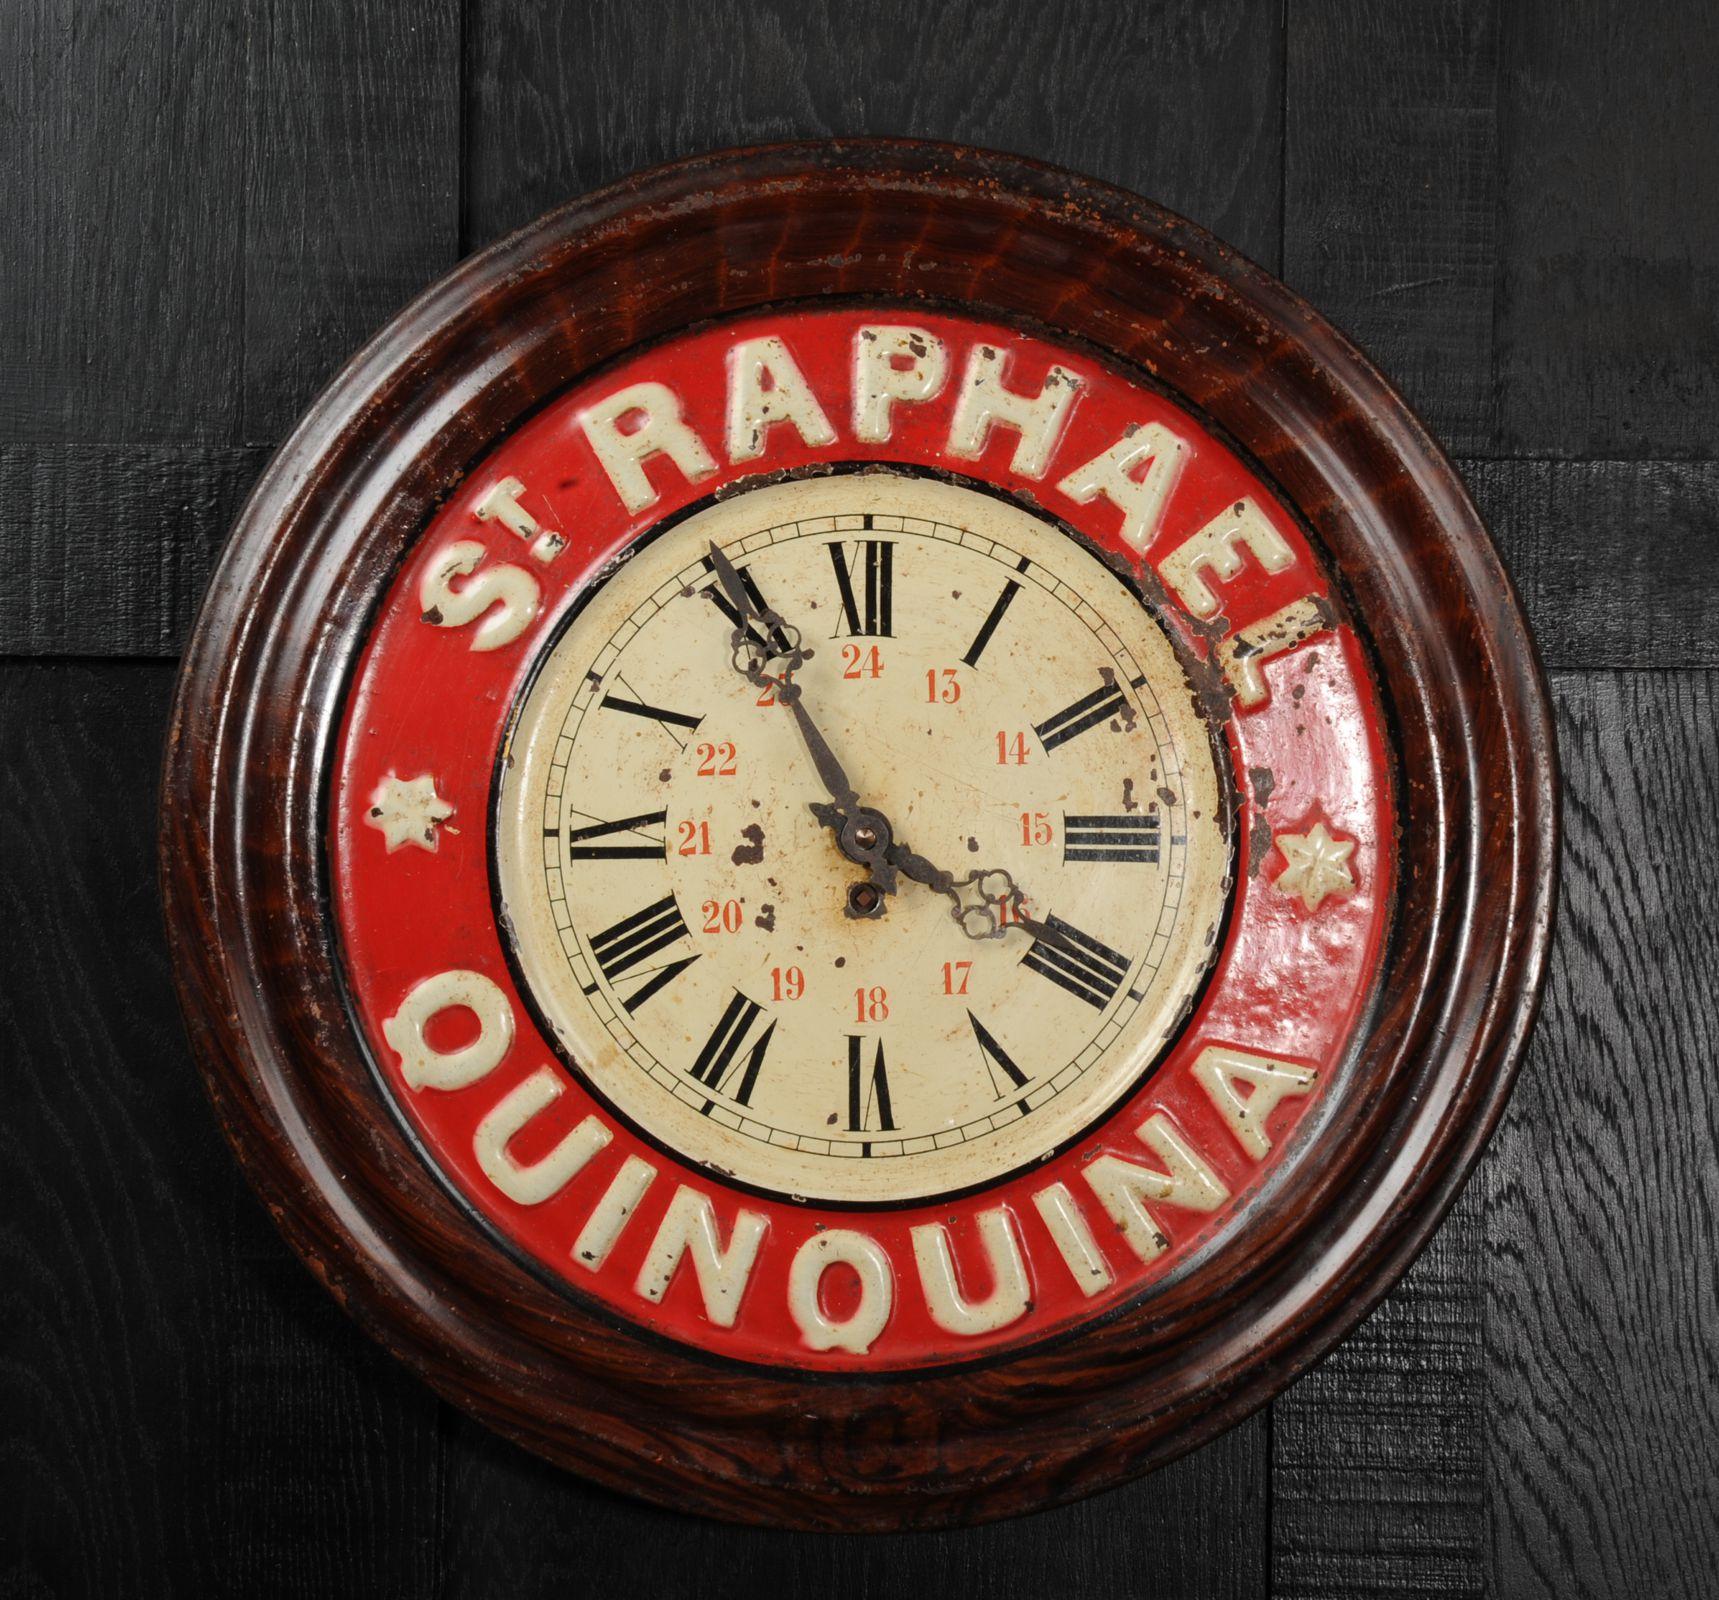 A wonderful original Saint Raphaël tole advertising clock, circa 1920. Found by our buyer in a long derelict French bar it has been worn by years of neglect with a wonderful patina of paint loss and rust. 

Originally a mechanical movement by the